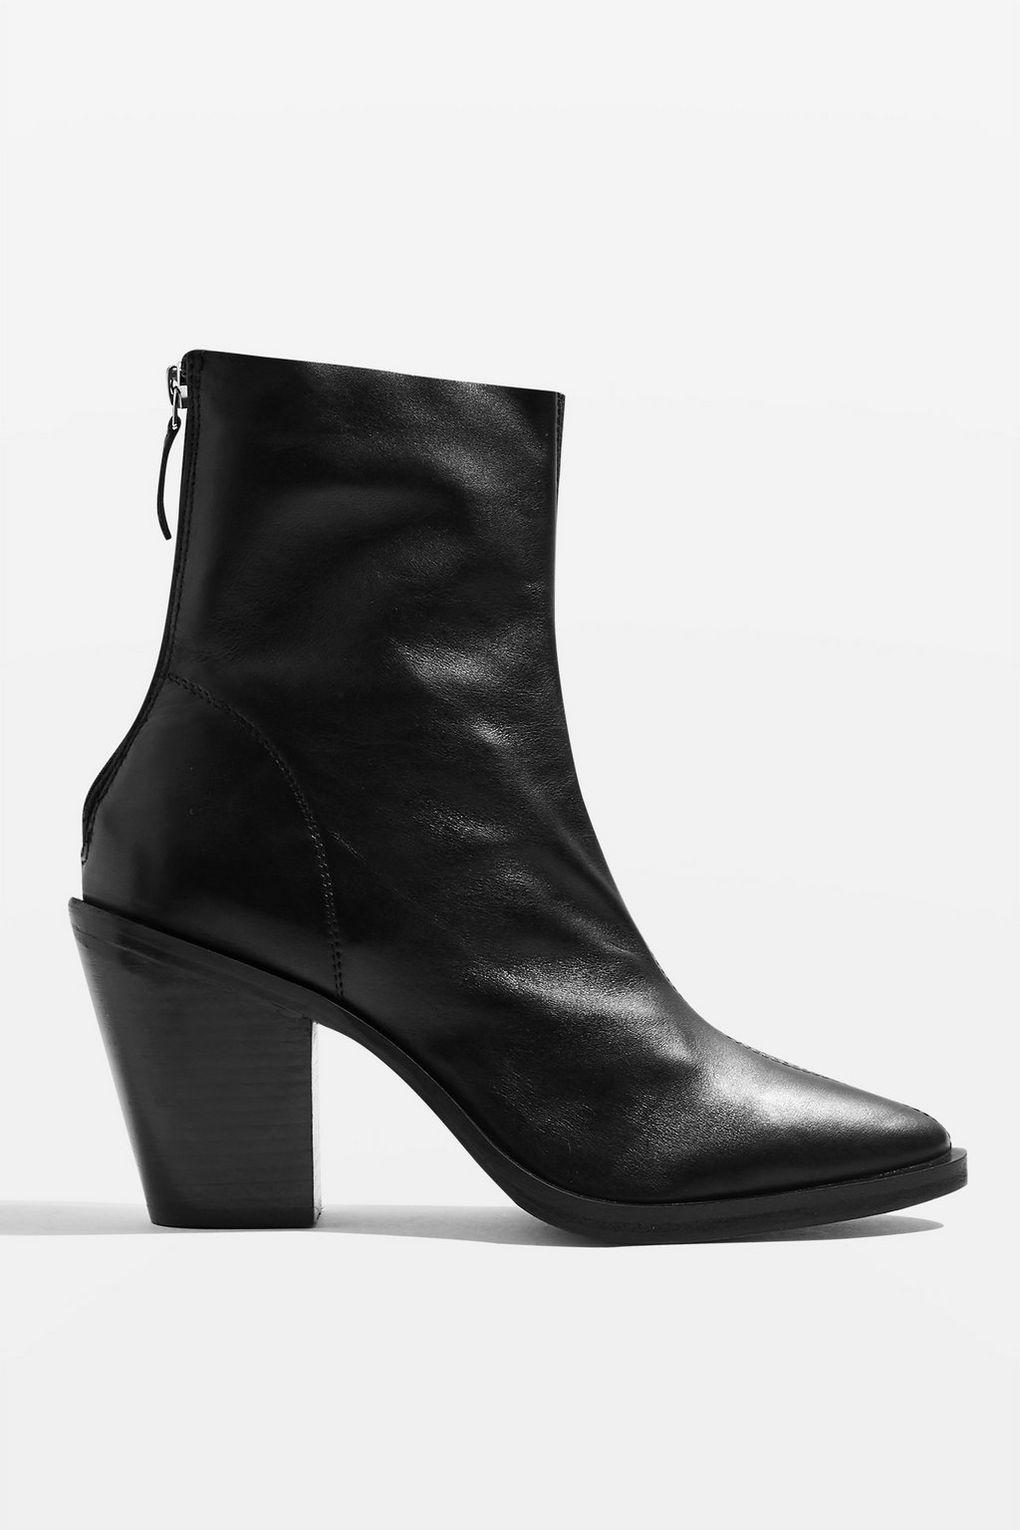 topshop march boots